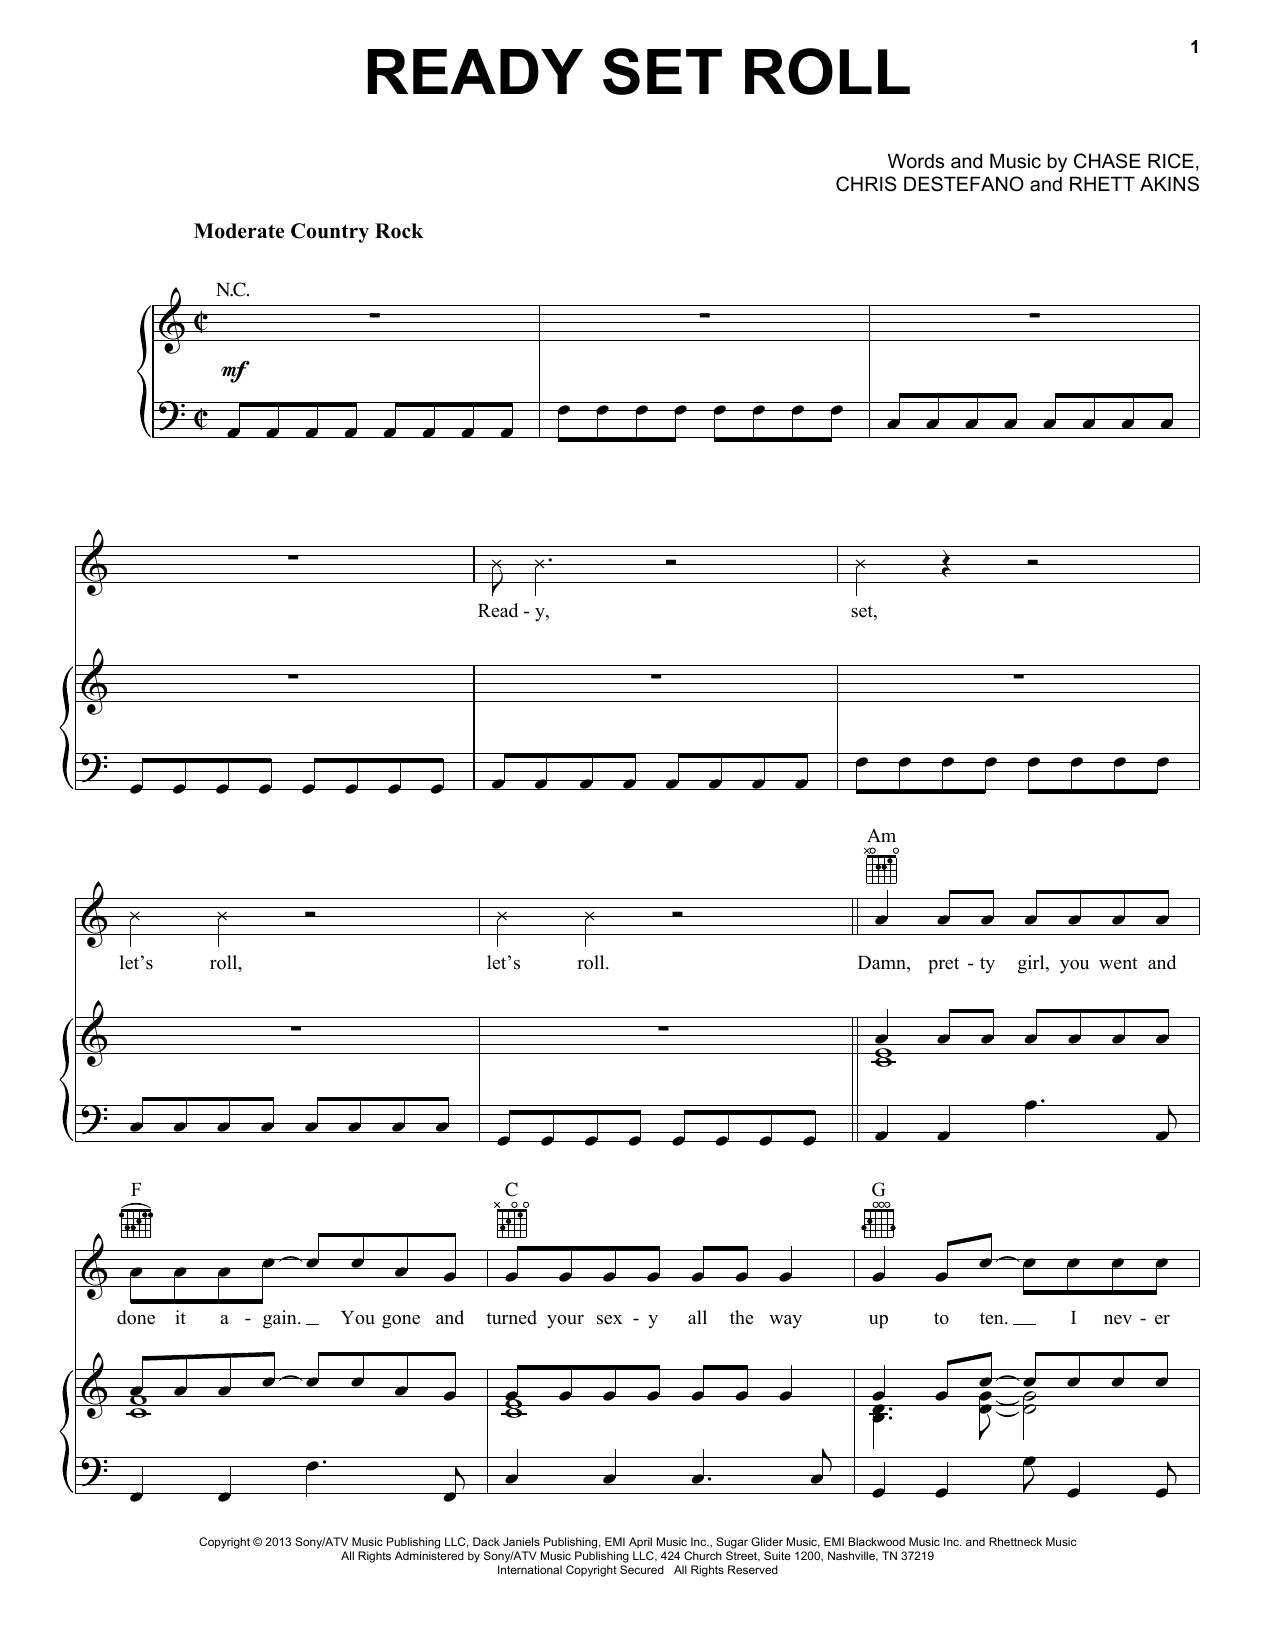 Download Chase Rice Ready Set Roll Sheet Music